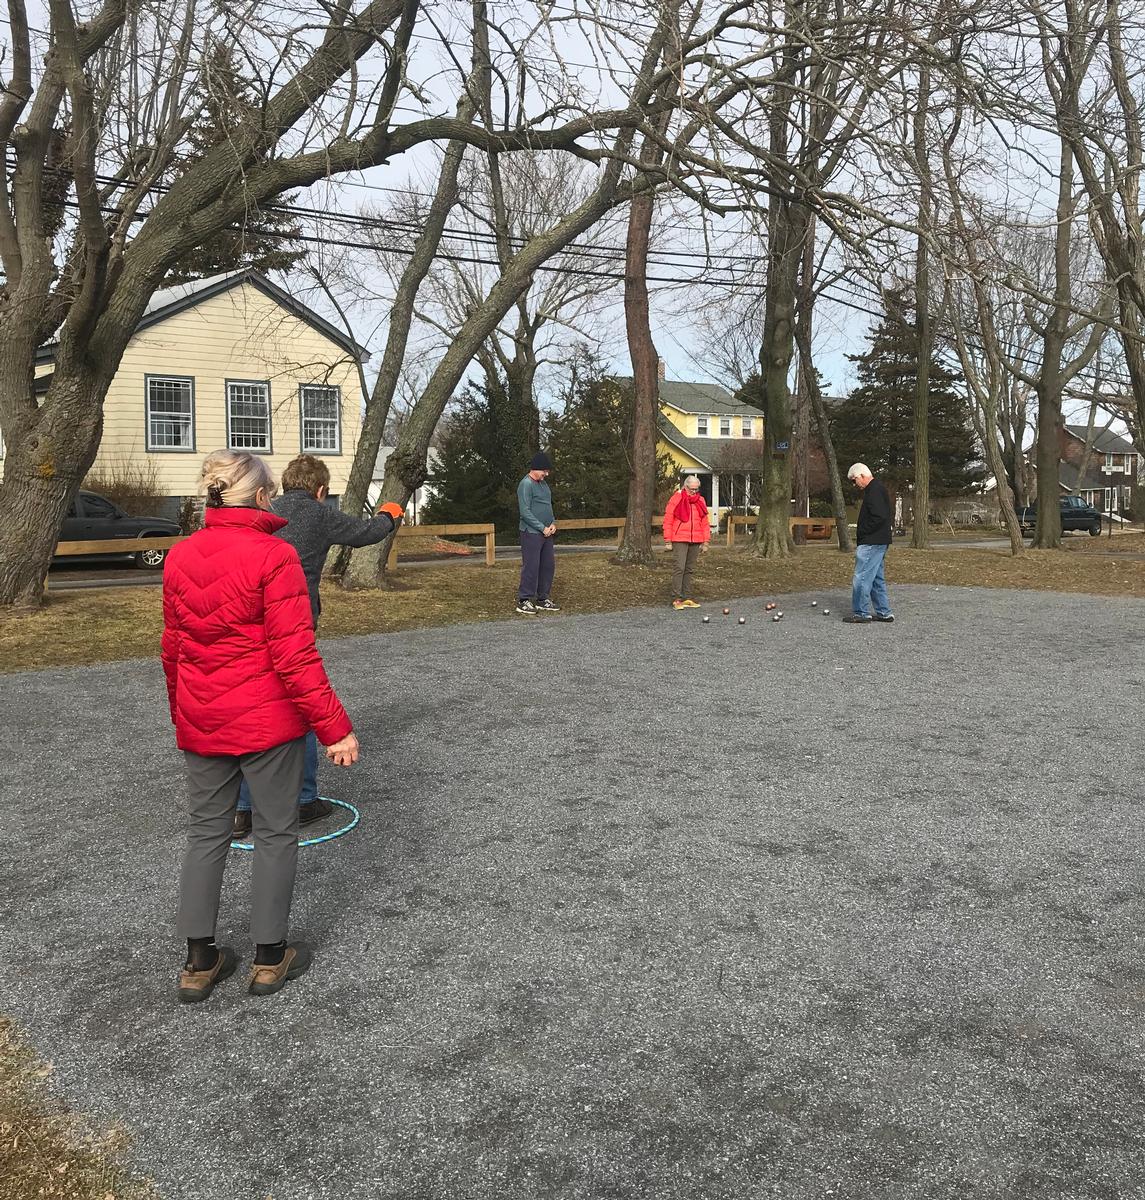 Start of 2018 season for the New Suffolk United Pétanque